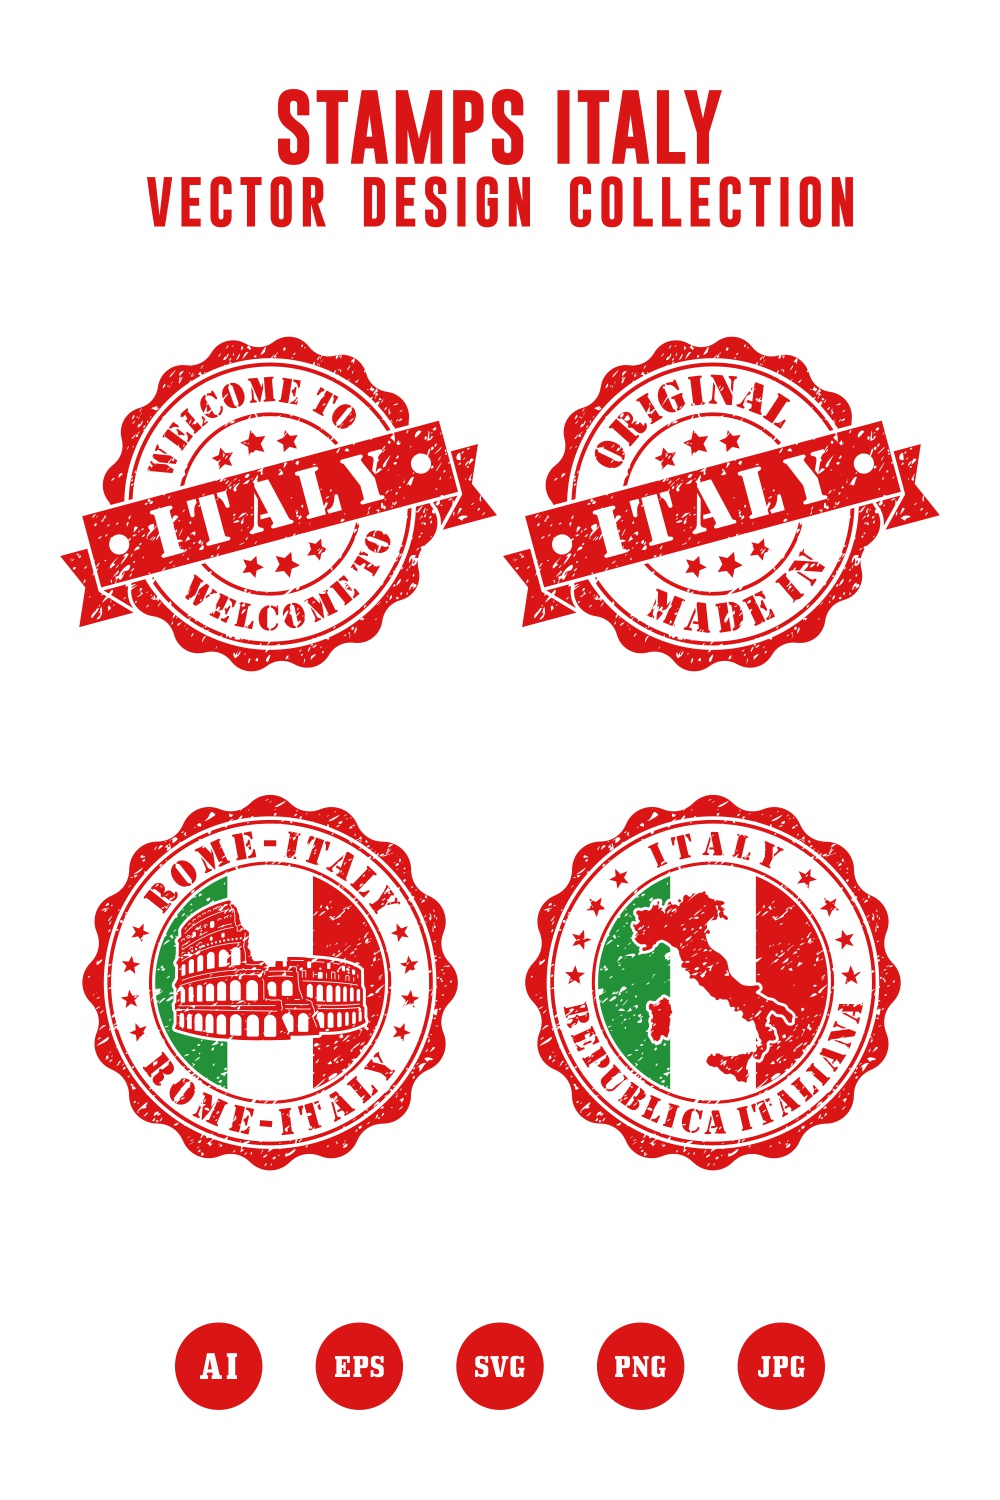 Welcome to Italy stamps vector logo design collection - $4 pinterest preview image.